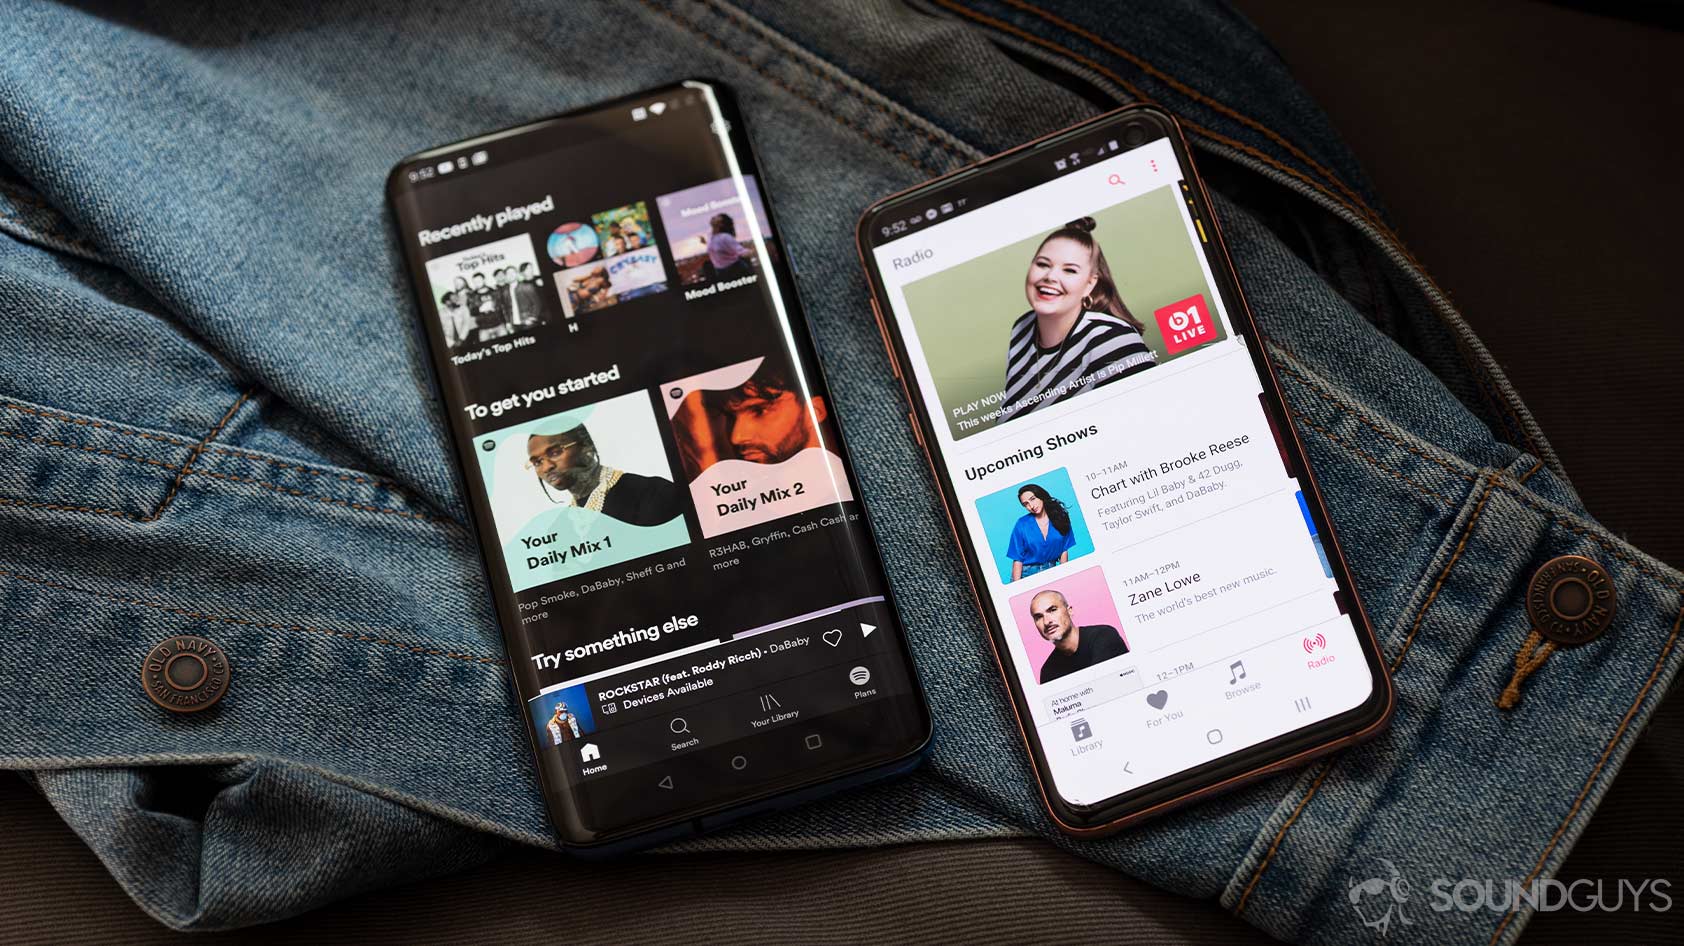 A picture of Apple Music and Spotify on a OnePlus 7 Pro and Samsung Galaxy S10e, respectively, to illustrate CD Baby partners.